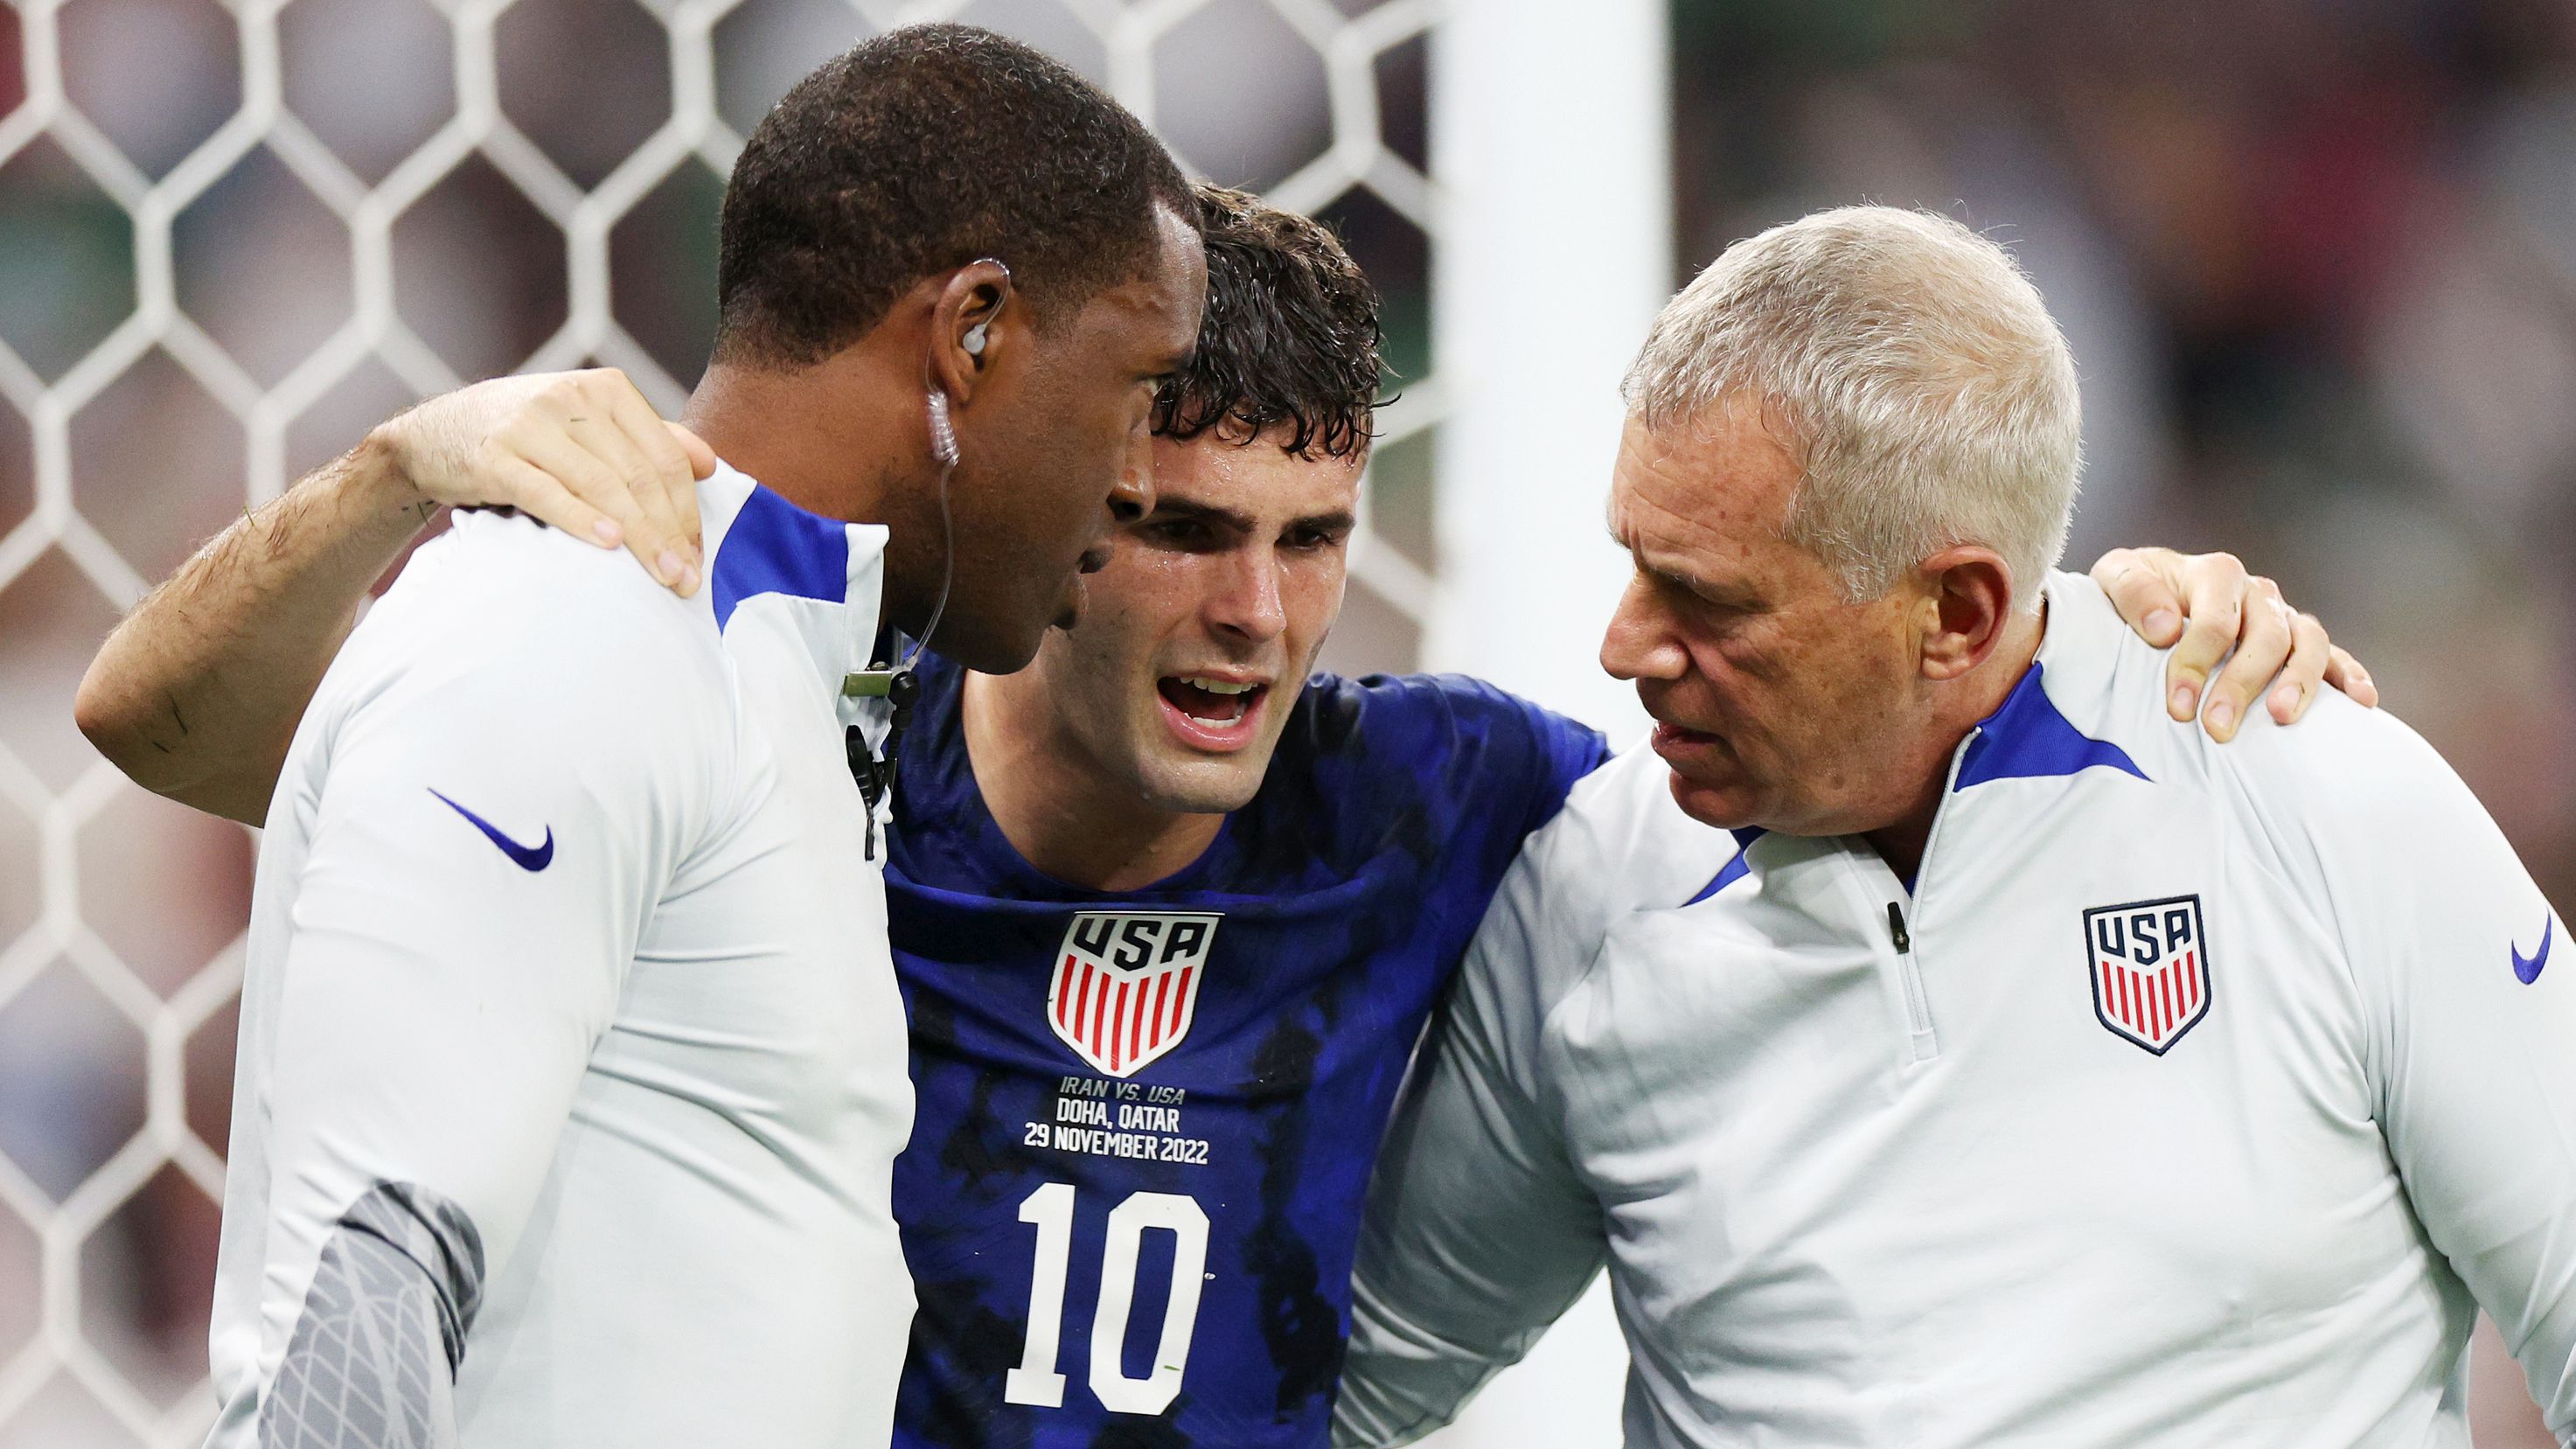 DOHA, QATAR - NOVEMBER 29: Christian Pulisic of United States receives medical treatment after scoring their sides first goal during the FIFA World Cup Qatar 2022 Group B match between IR Iran and USA at Al Thumama Stadium on November 29, 2022 in Doha, Qatar. (Photo by Dean Mouhtaropoulos/Getty Images)